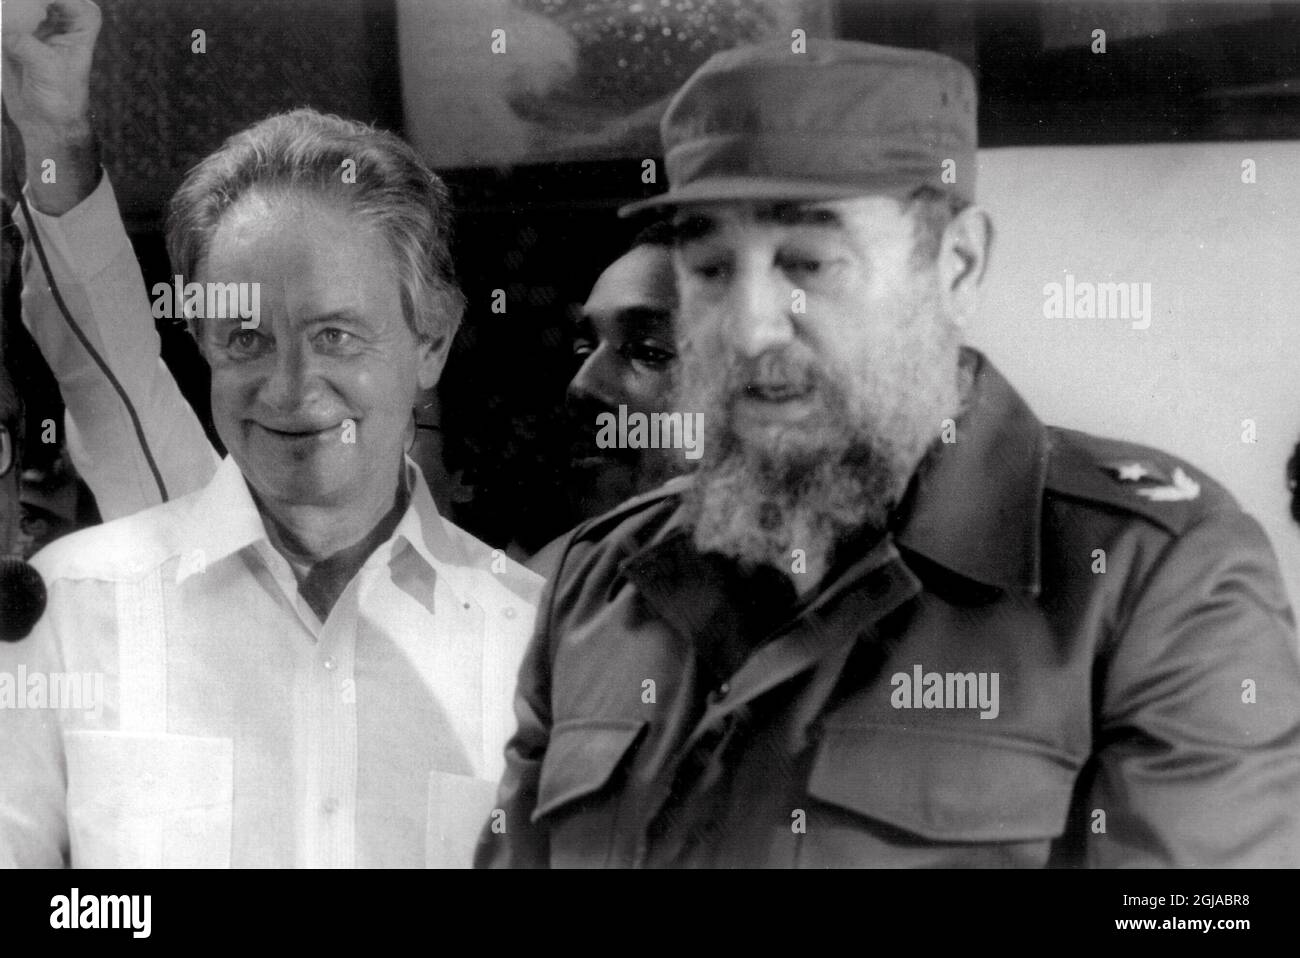 ARKIV NEW YORK 19751111 Swedens Prime Minister Olof Palme and Fidel Castro during a visist by Palme to Cuba July 2,1975 Foto: Hasse Persson / EXP / TT / Kod: 417 **SWEDEN OUT**  Stock Photo